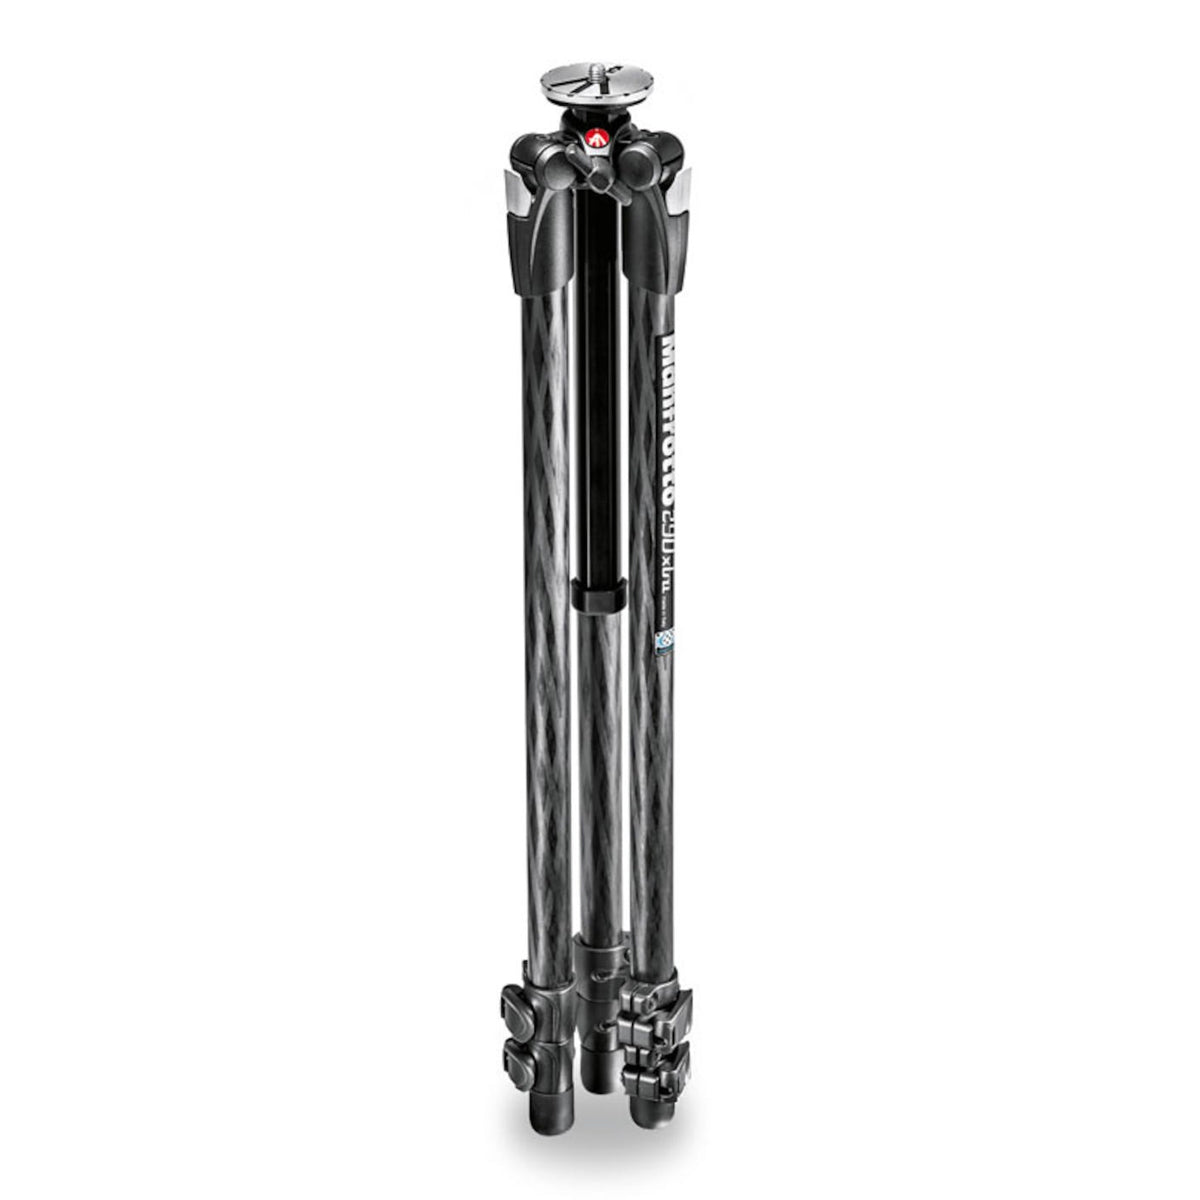 Manfrotto 290 XTRA Carbon Fiber Tripod by Manfrotto | Optics - goHUNT Shop